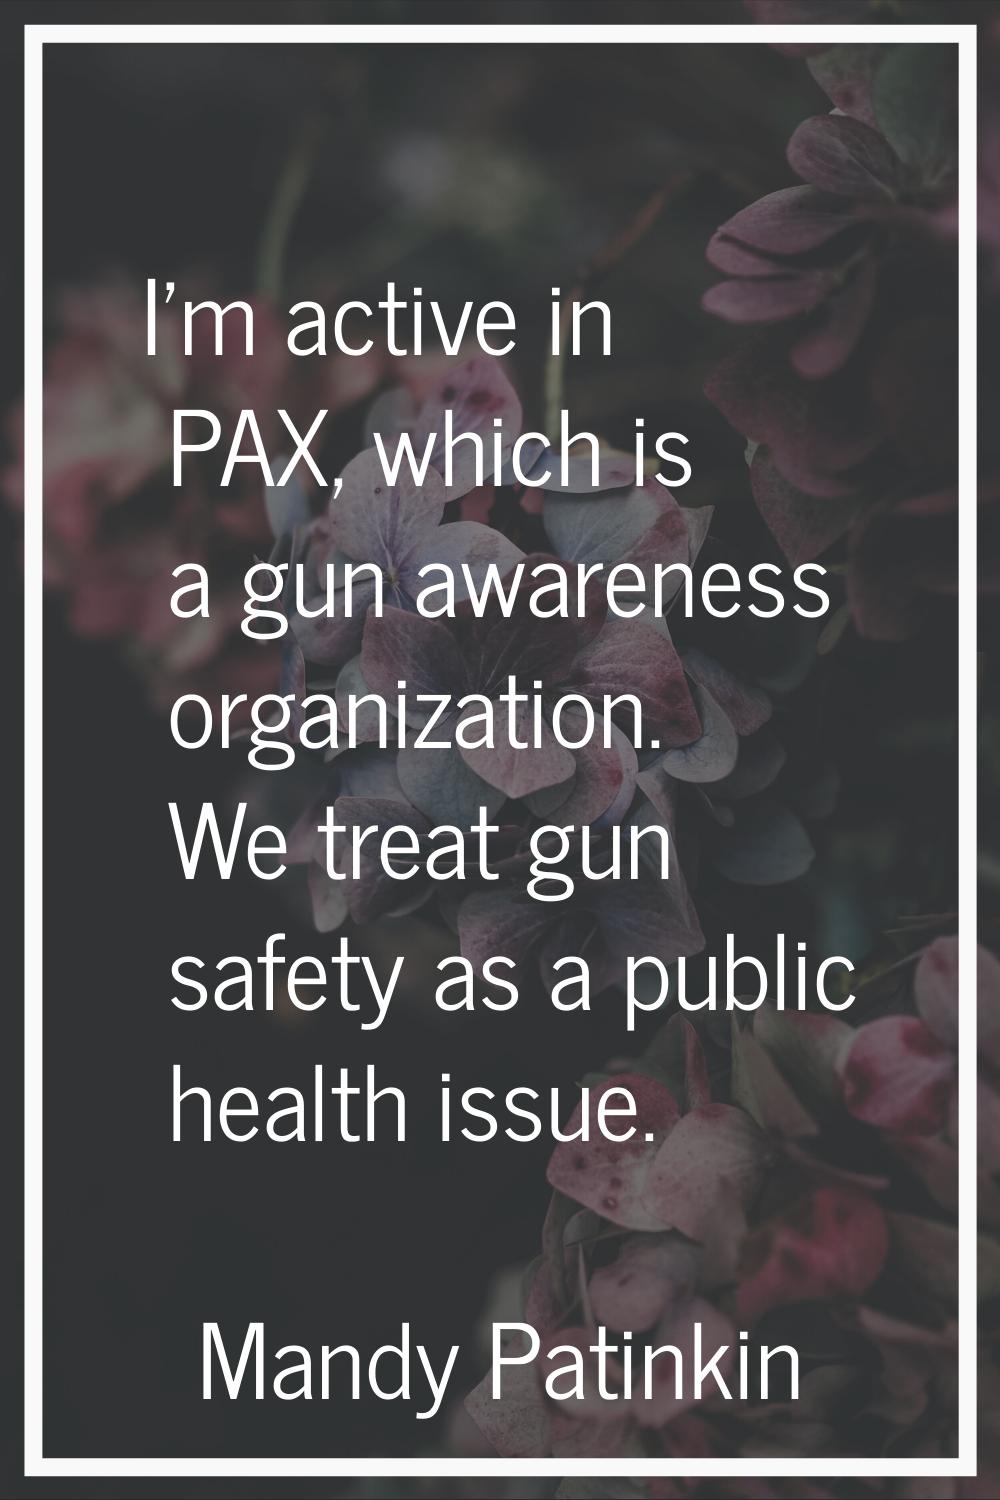 I'm active in PAX, which is a gun awareness organization. We treat gun safety as a public health is